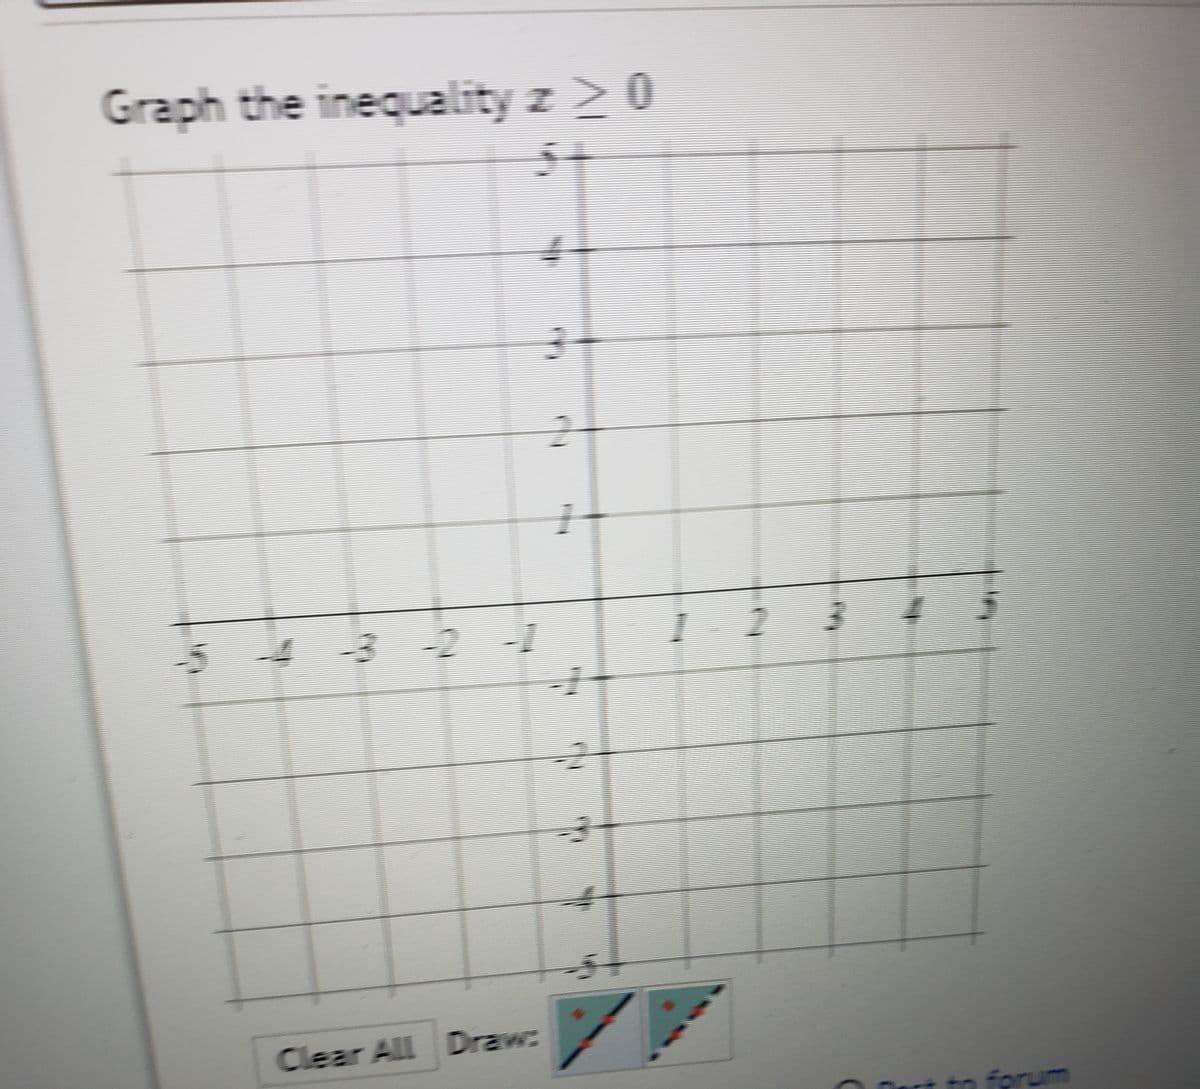 Graph the inequality z 20
5+
Clear All Draw:
ort to forum
